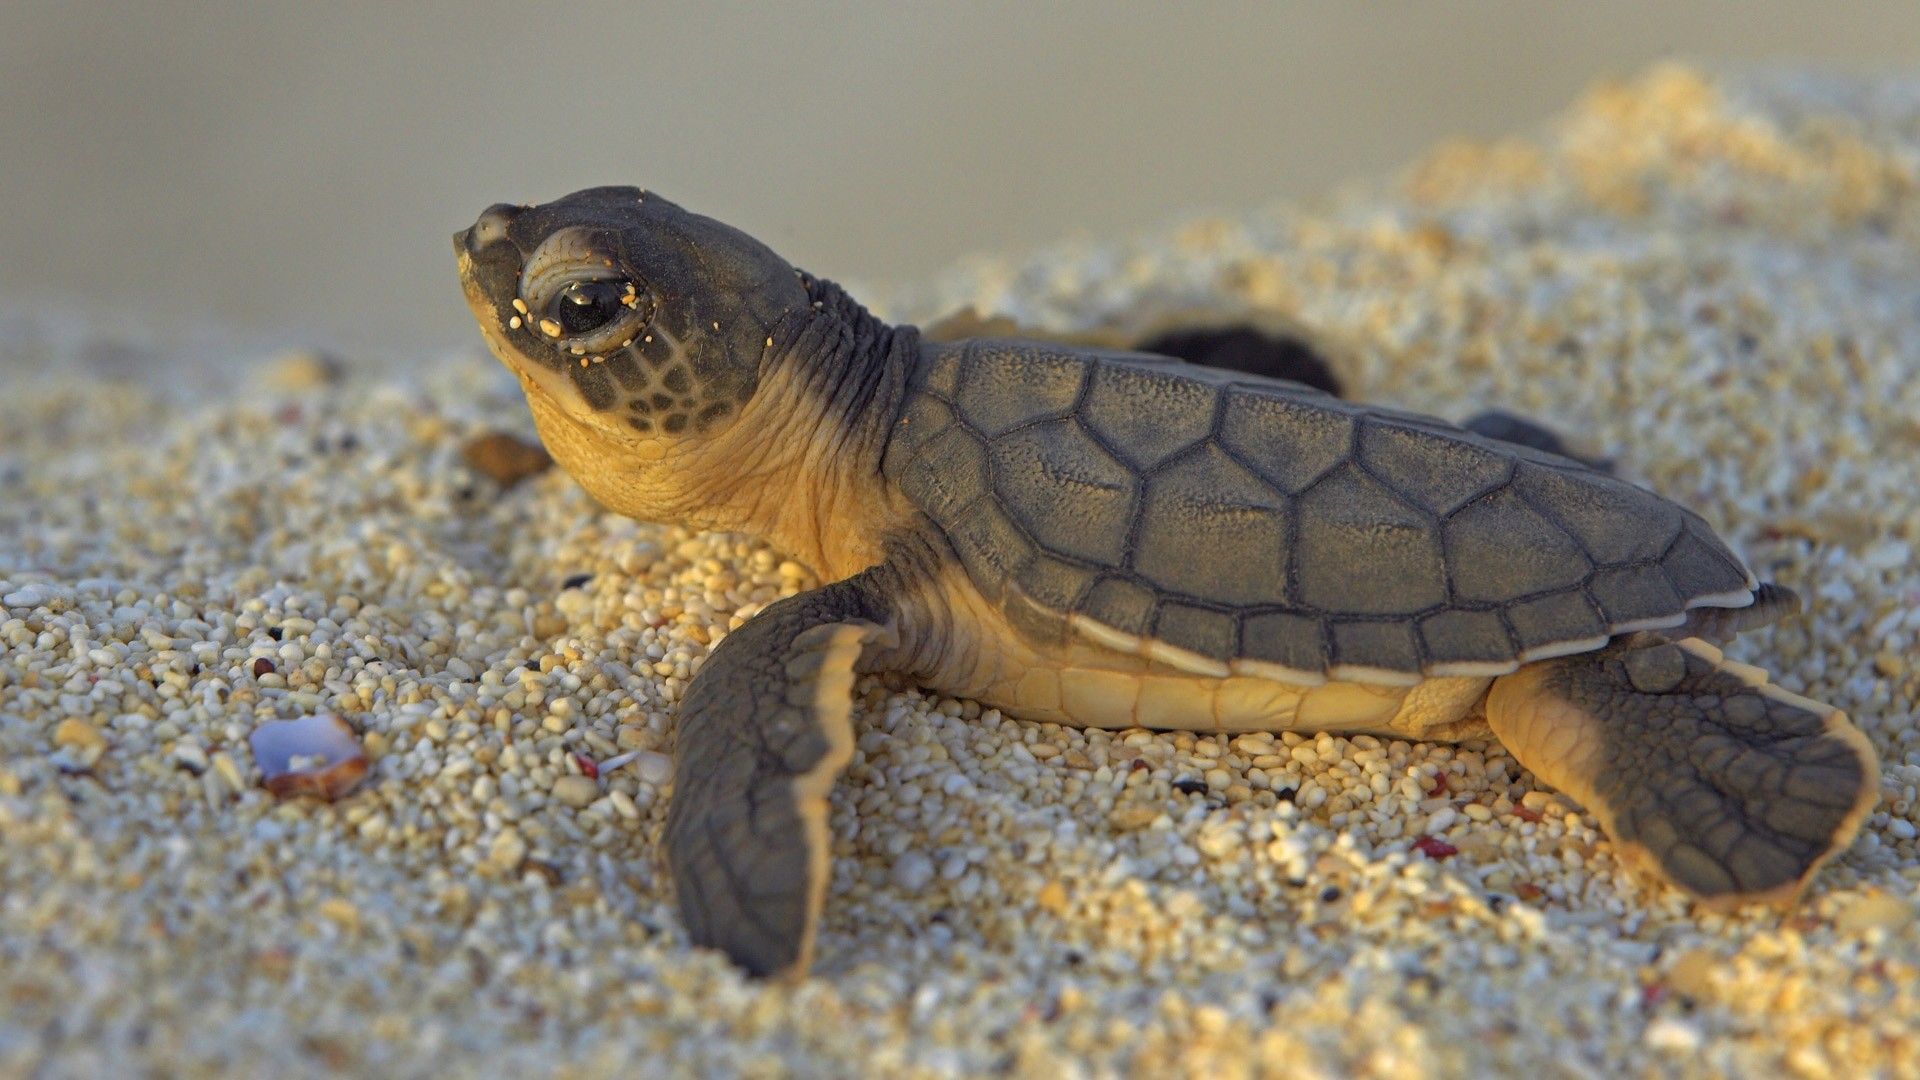 A small turtle sitting on the sand - Turtle